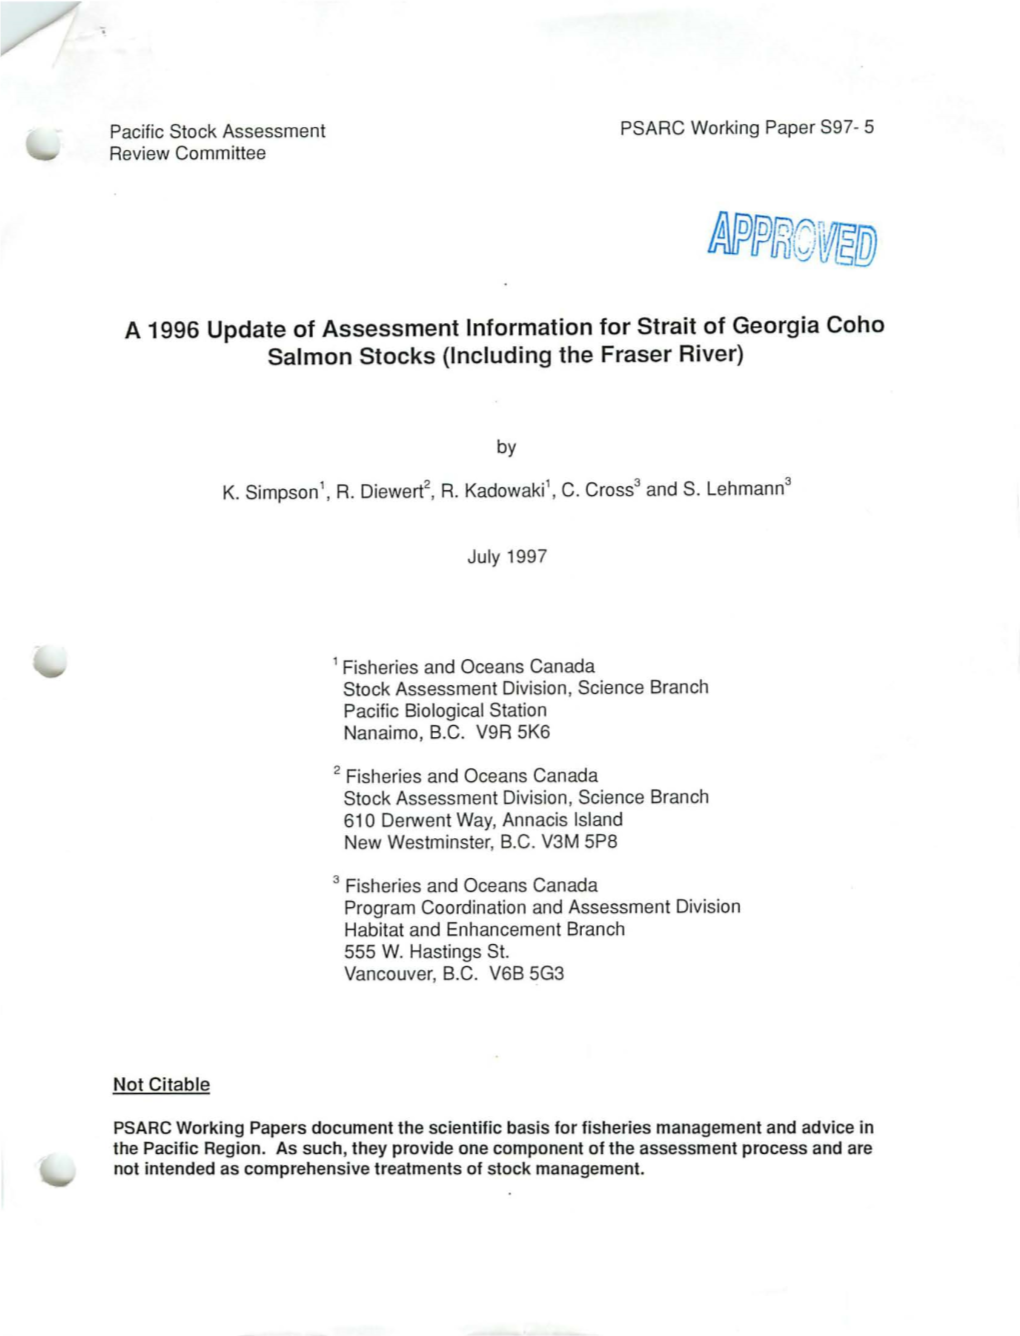 A 1996 Update of Assessment Information for Strait of Georgia Coho Salmon Stocks (Including the Fraser River)